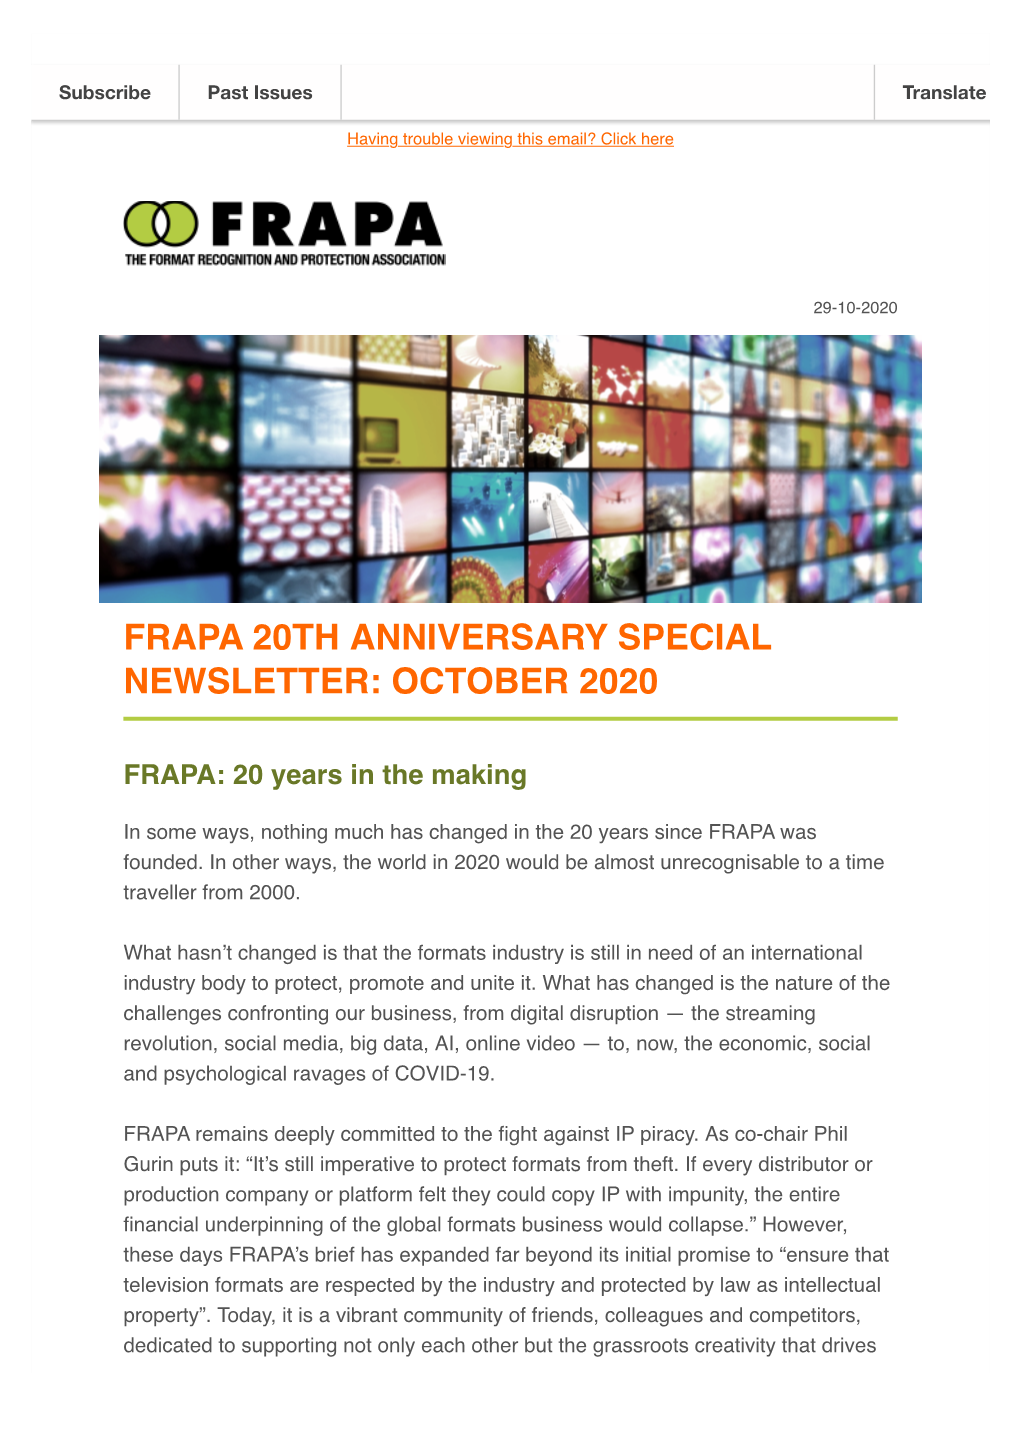 Frapa 20Th Anniversary Special Newsletter: October 2020